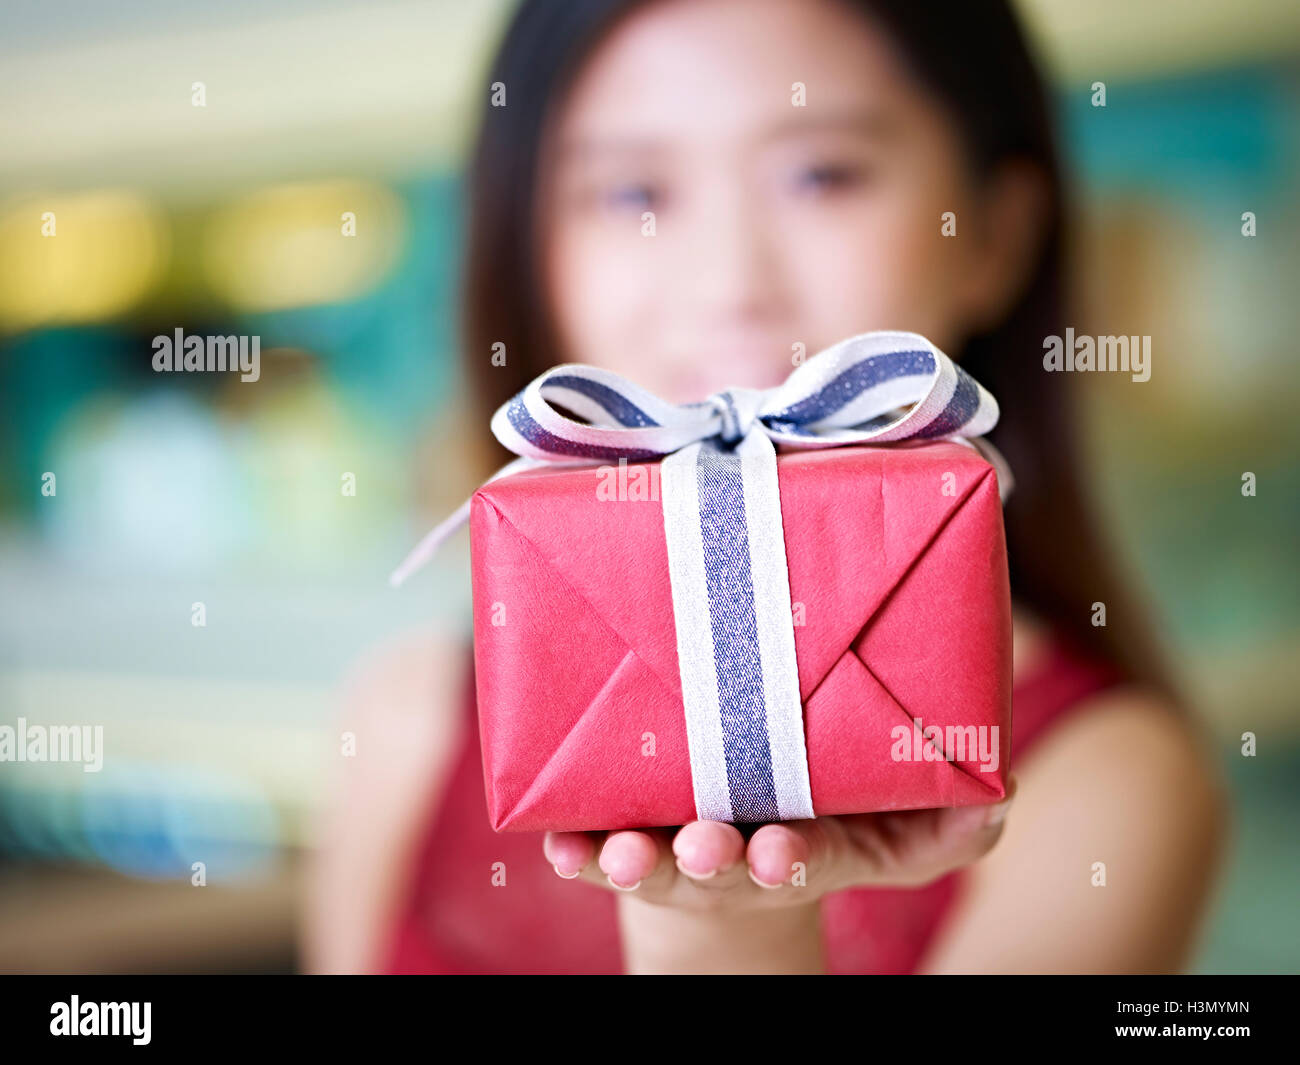 beautiful young asian woman presenting a wrapped box of gift and smiling, selective focus on the box Stock Photo